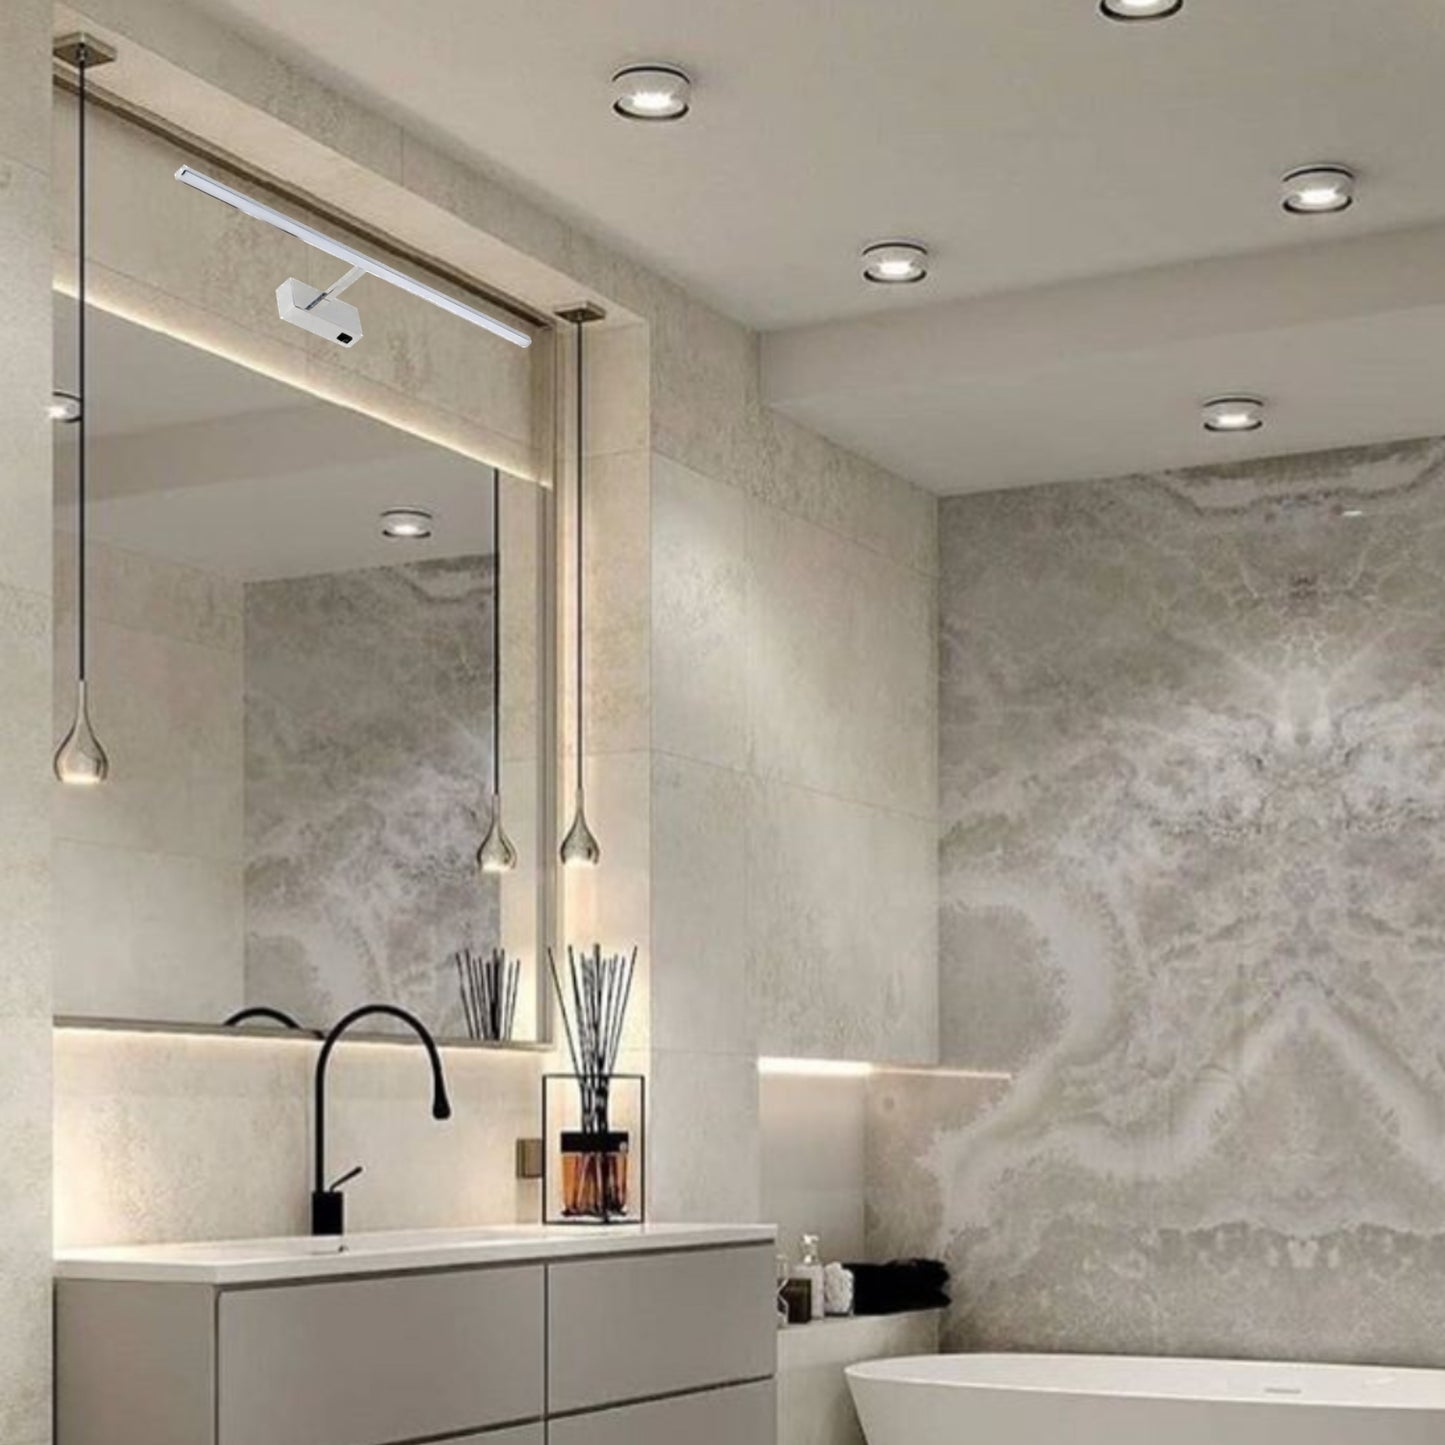 With our Mills LED over mirror wall light you can really give your bathroom or wall space the designer finish it deserves. With its modern chrome body and opal diffuser this light is sure to add style and class to your room. Can also look great as a wall light in hallways, over pictures and in kitchens. Mills is the perfect simple light to fix over a mirror